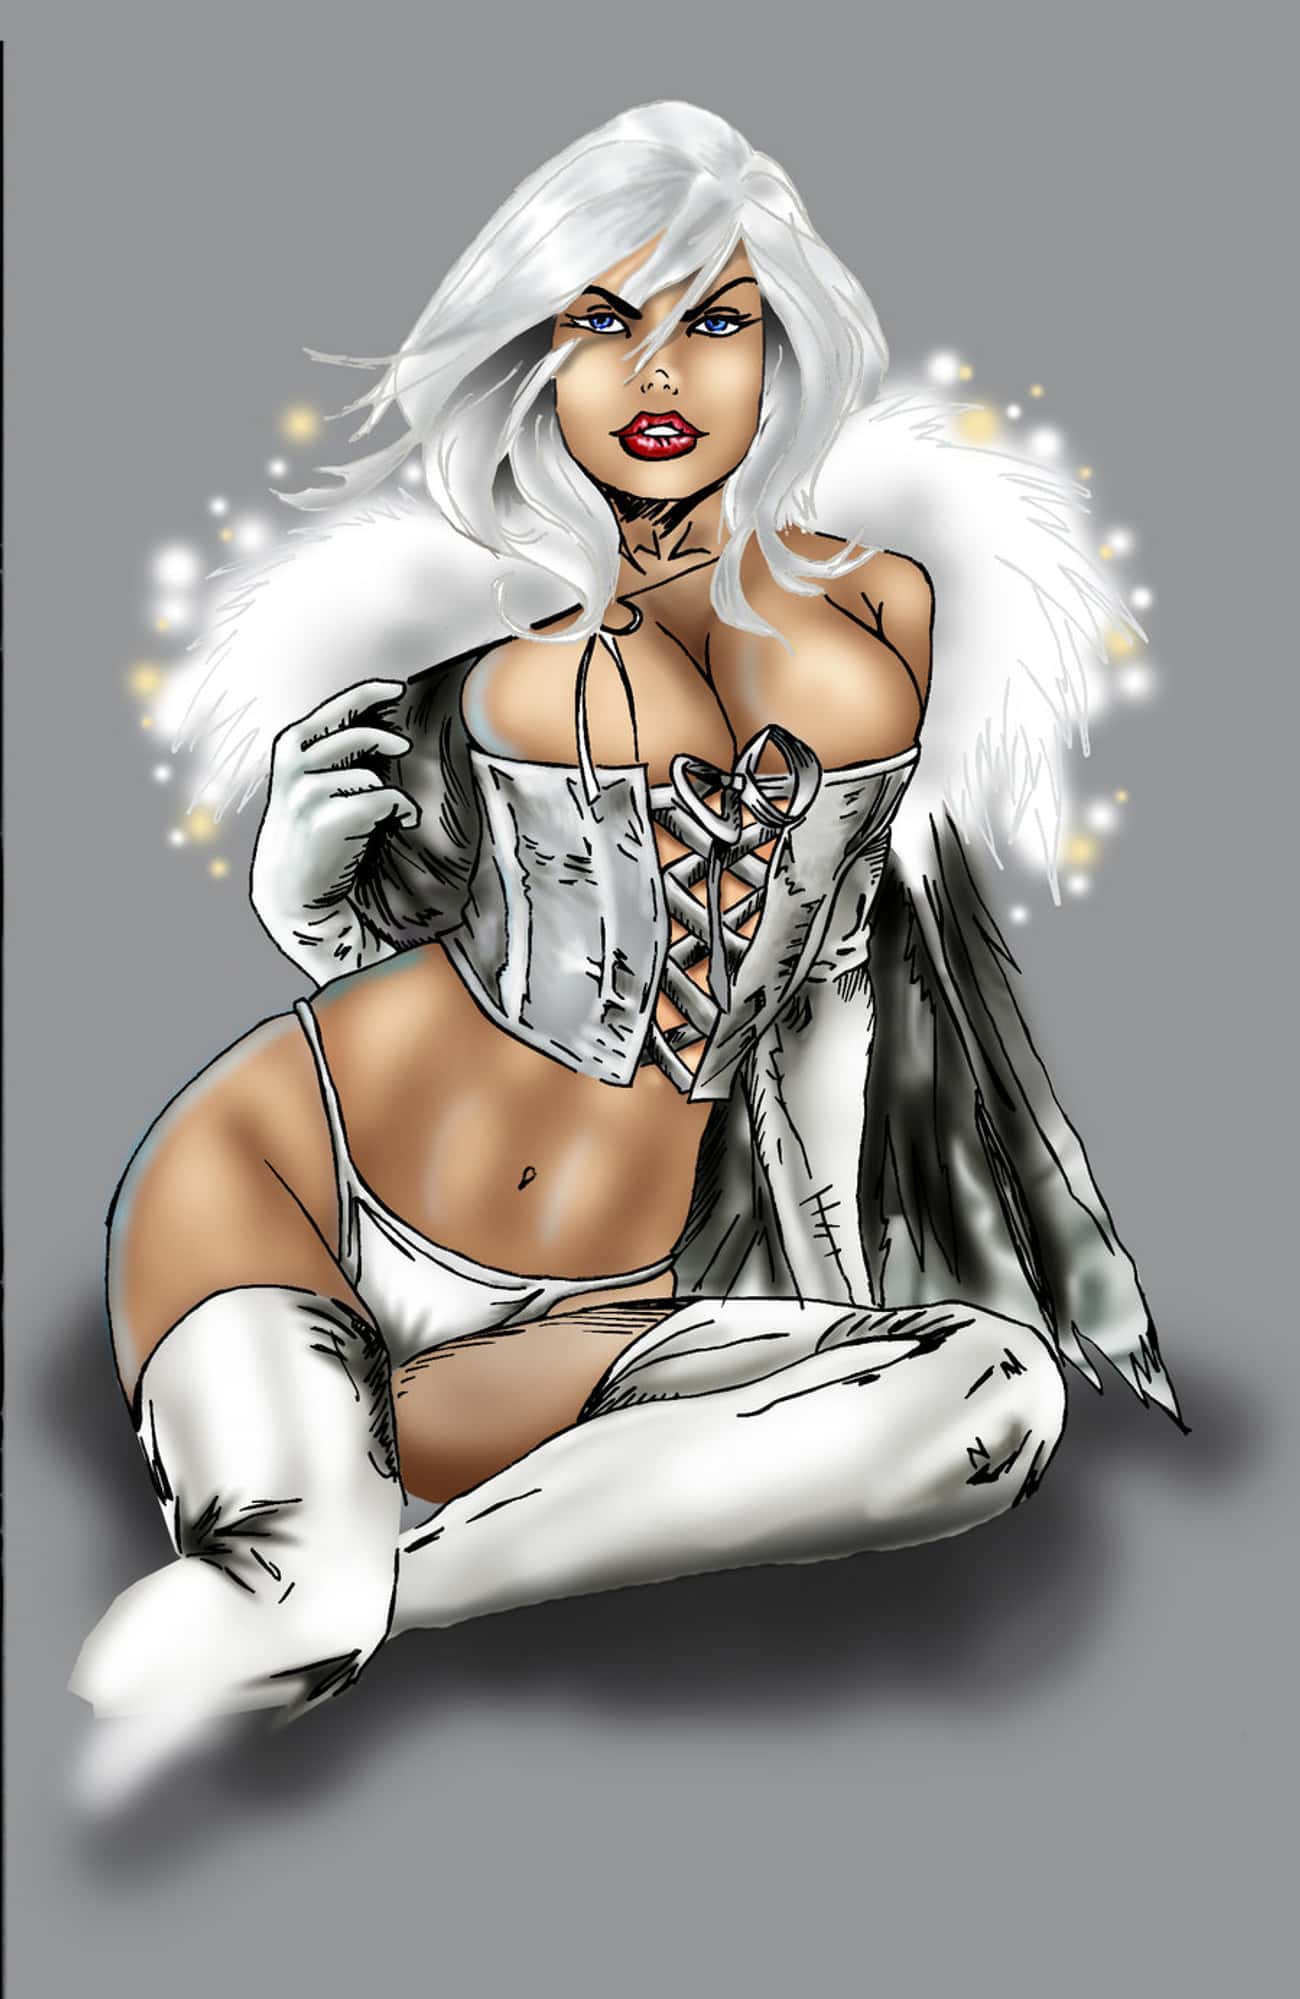 Emma Frost in Ribbon Corset with Fur Jacket